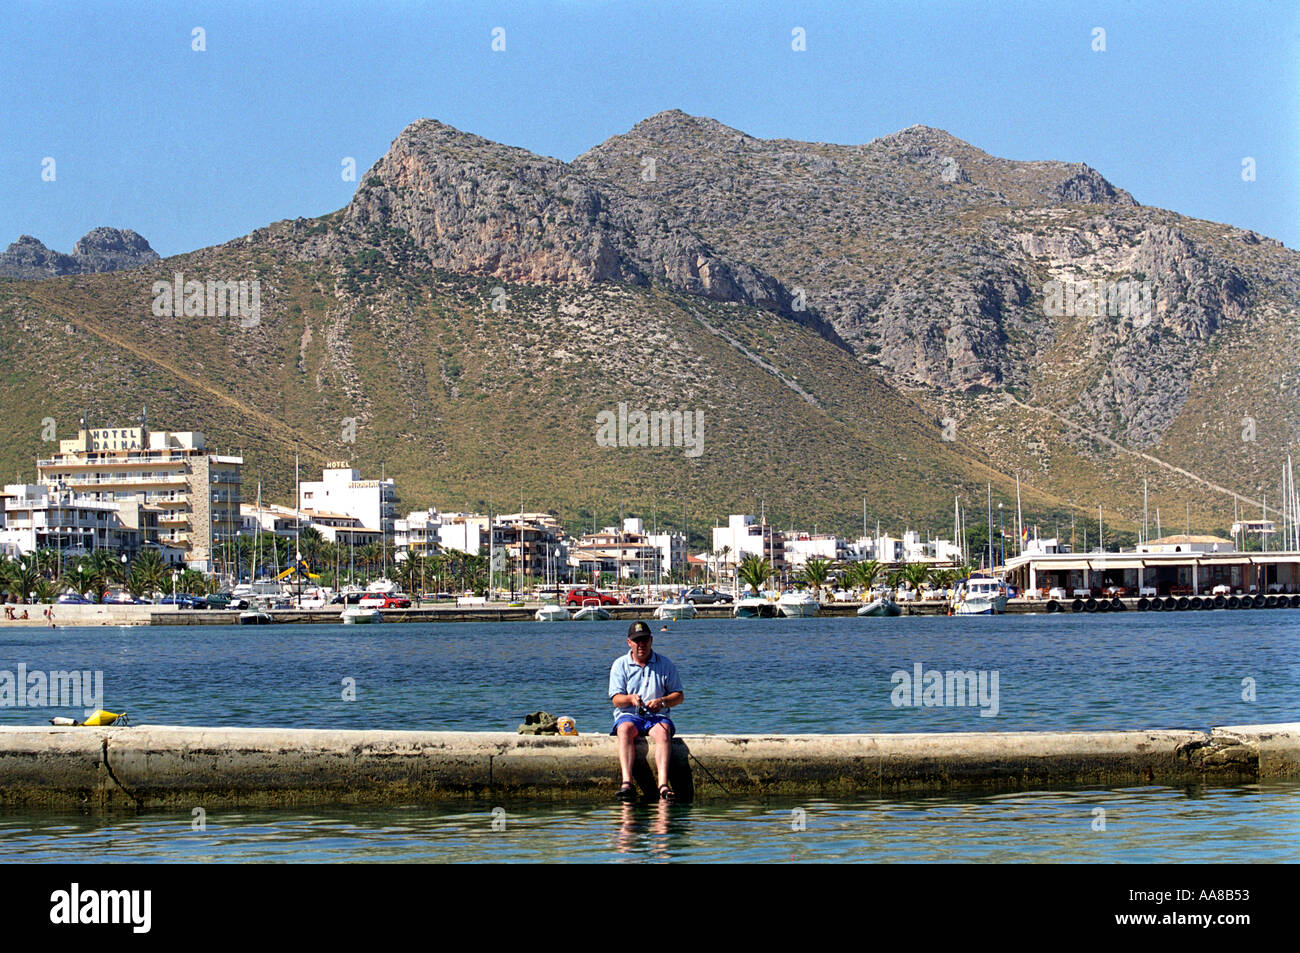 A tourist fishes on a walkway off the beach at Puerto Pollensa in Majorca Stock Photo